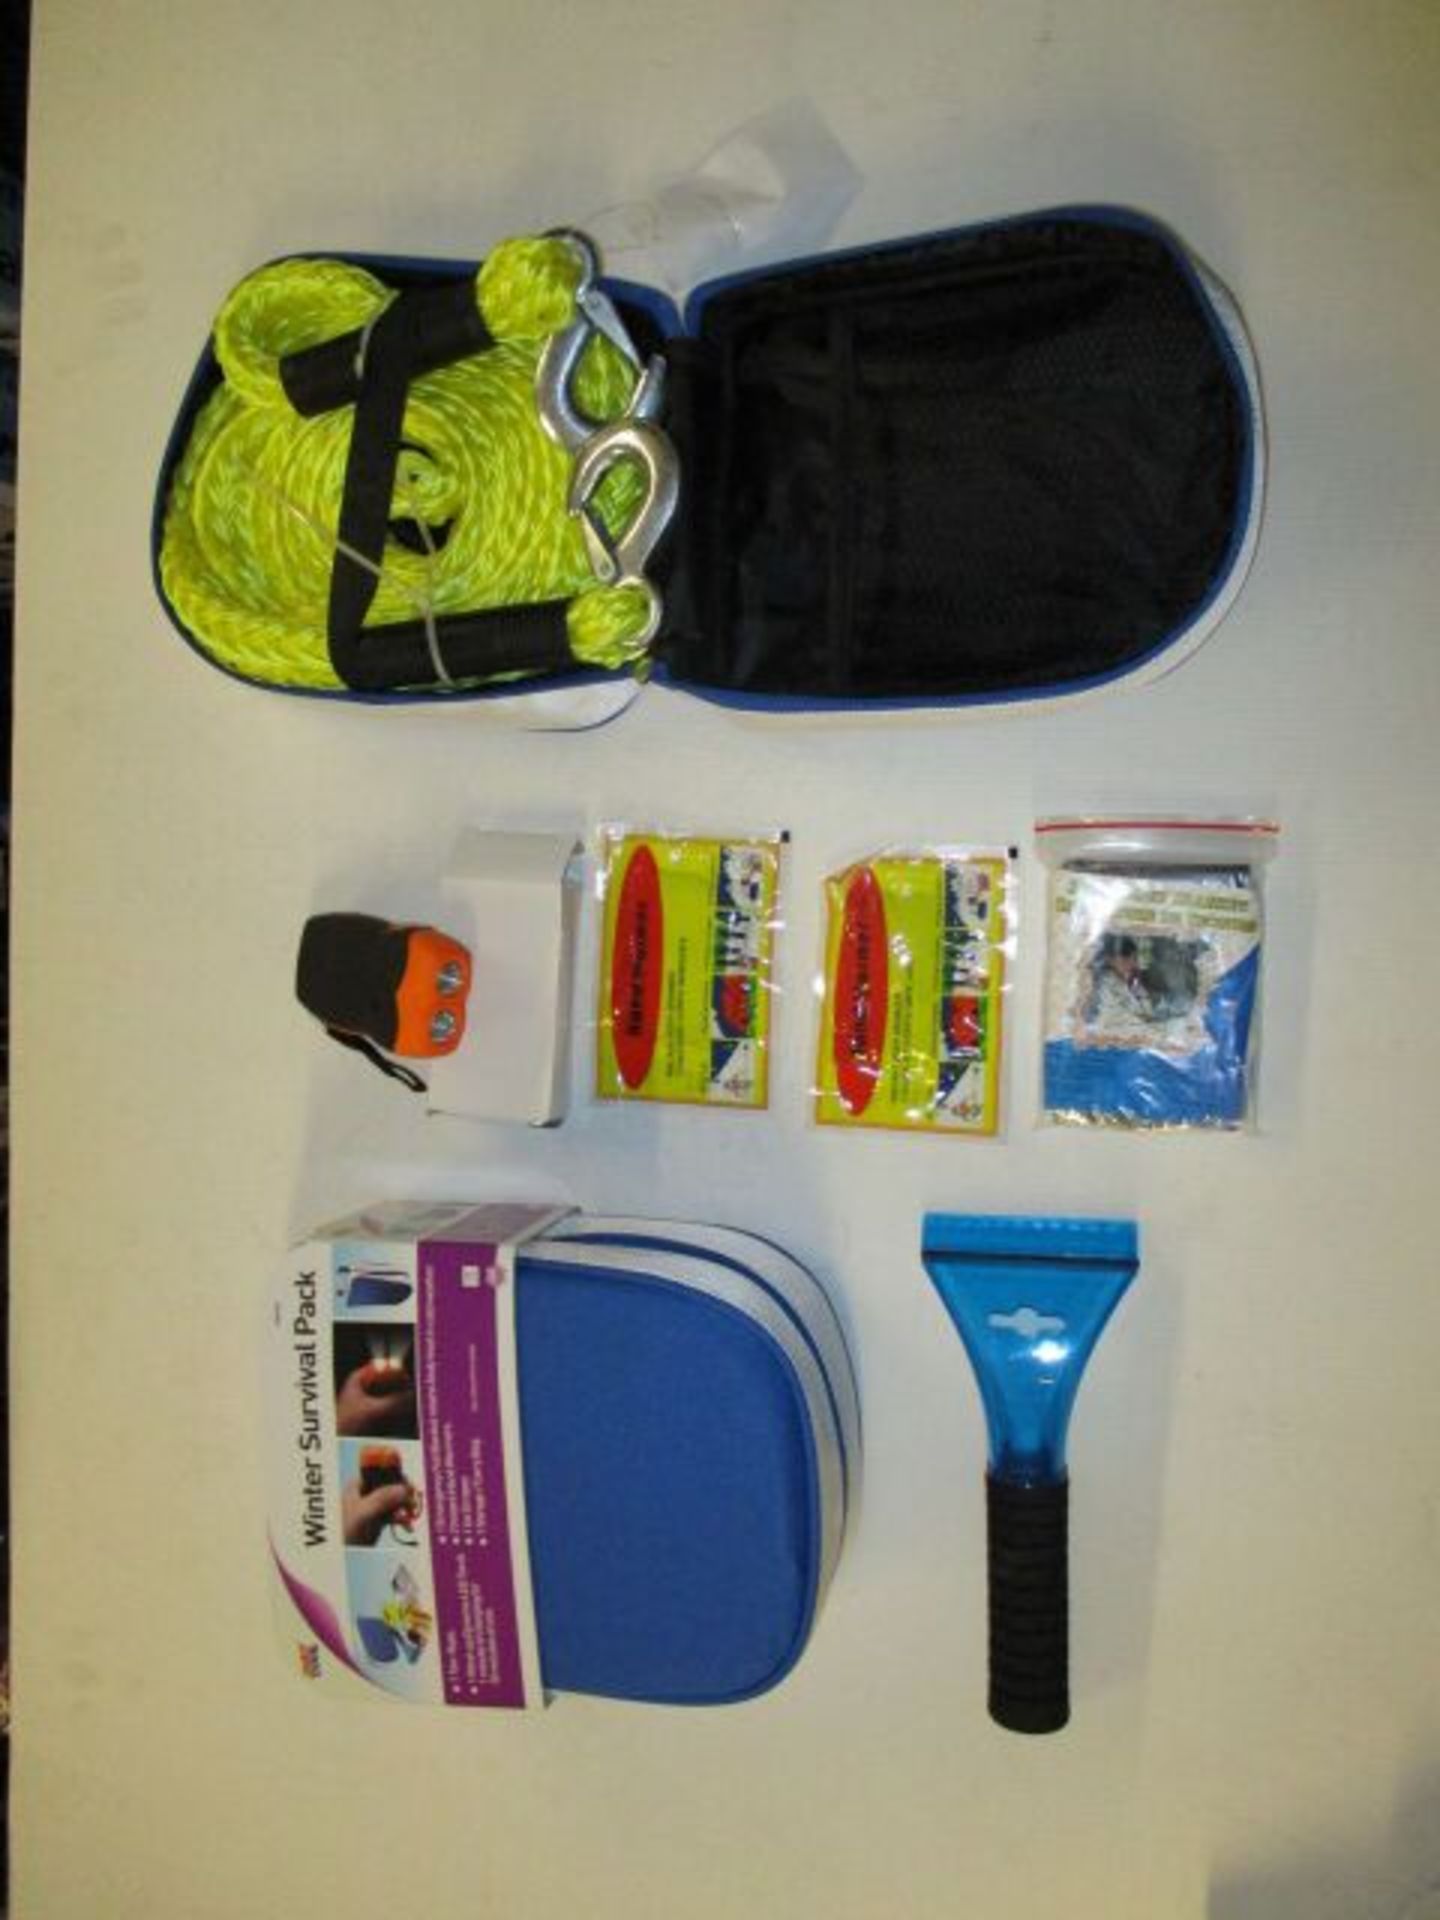 4pcs . x Brand new AutoCare winter car essentials kit - includes Tow Rope , Torch , Heat Blanket , - Image 2 of 2